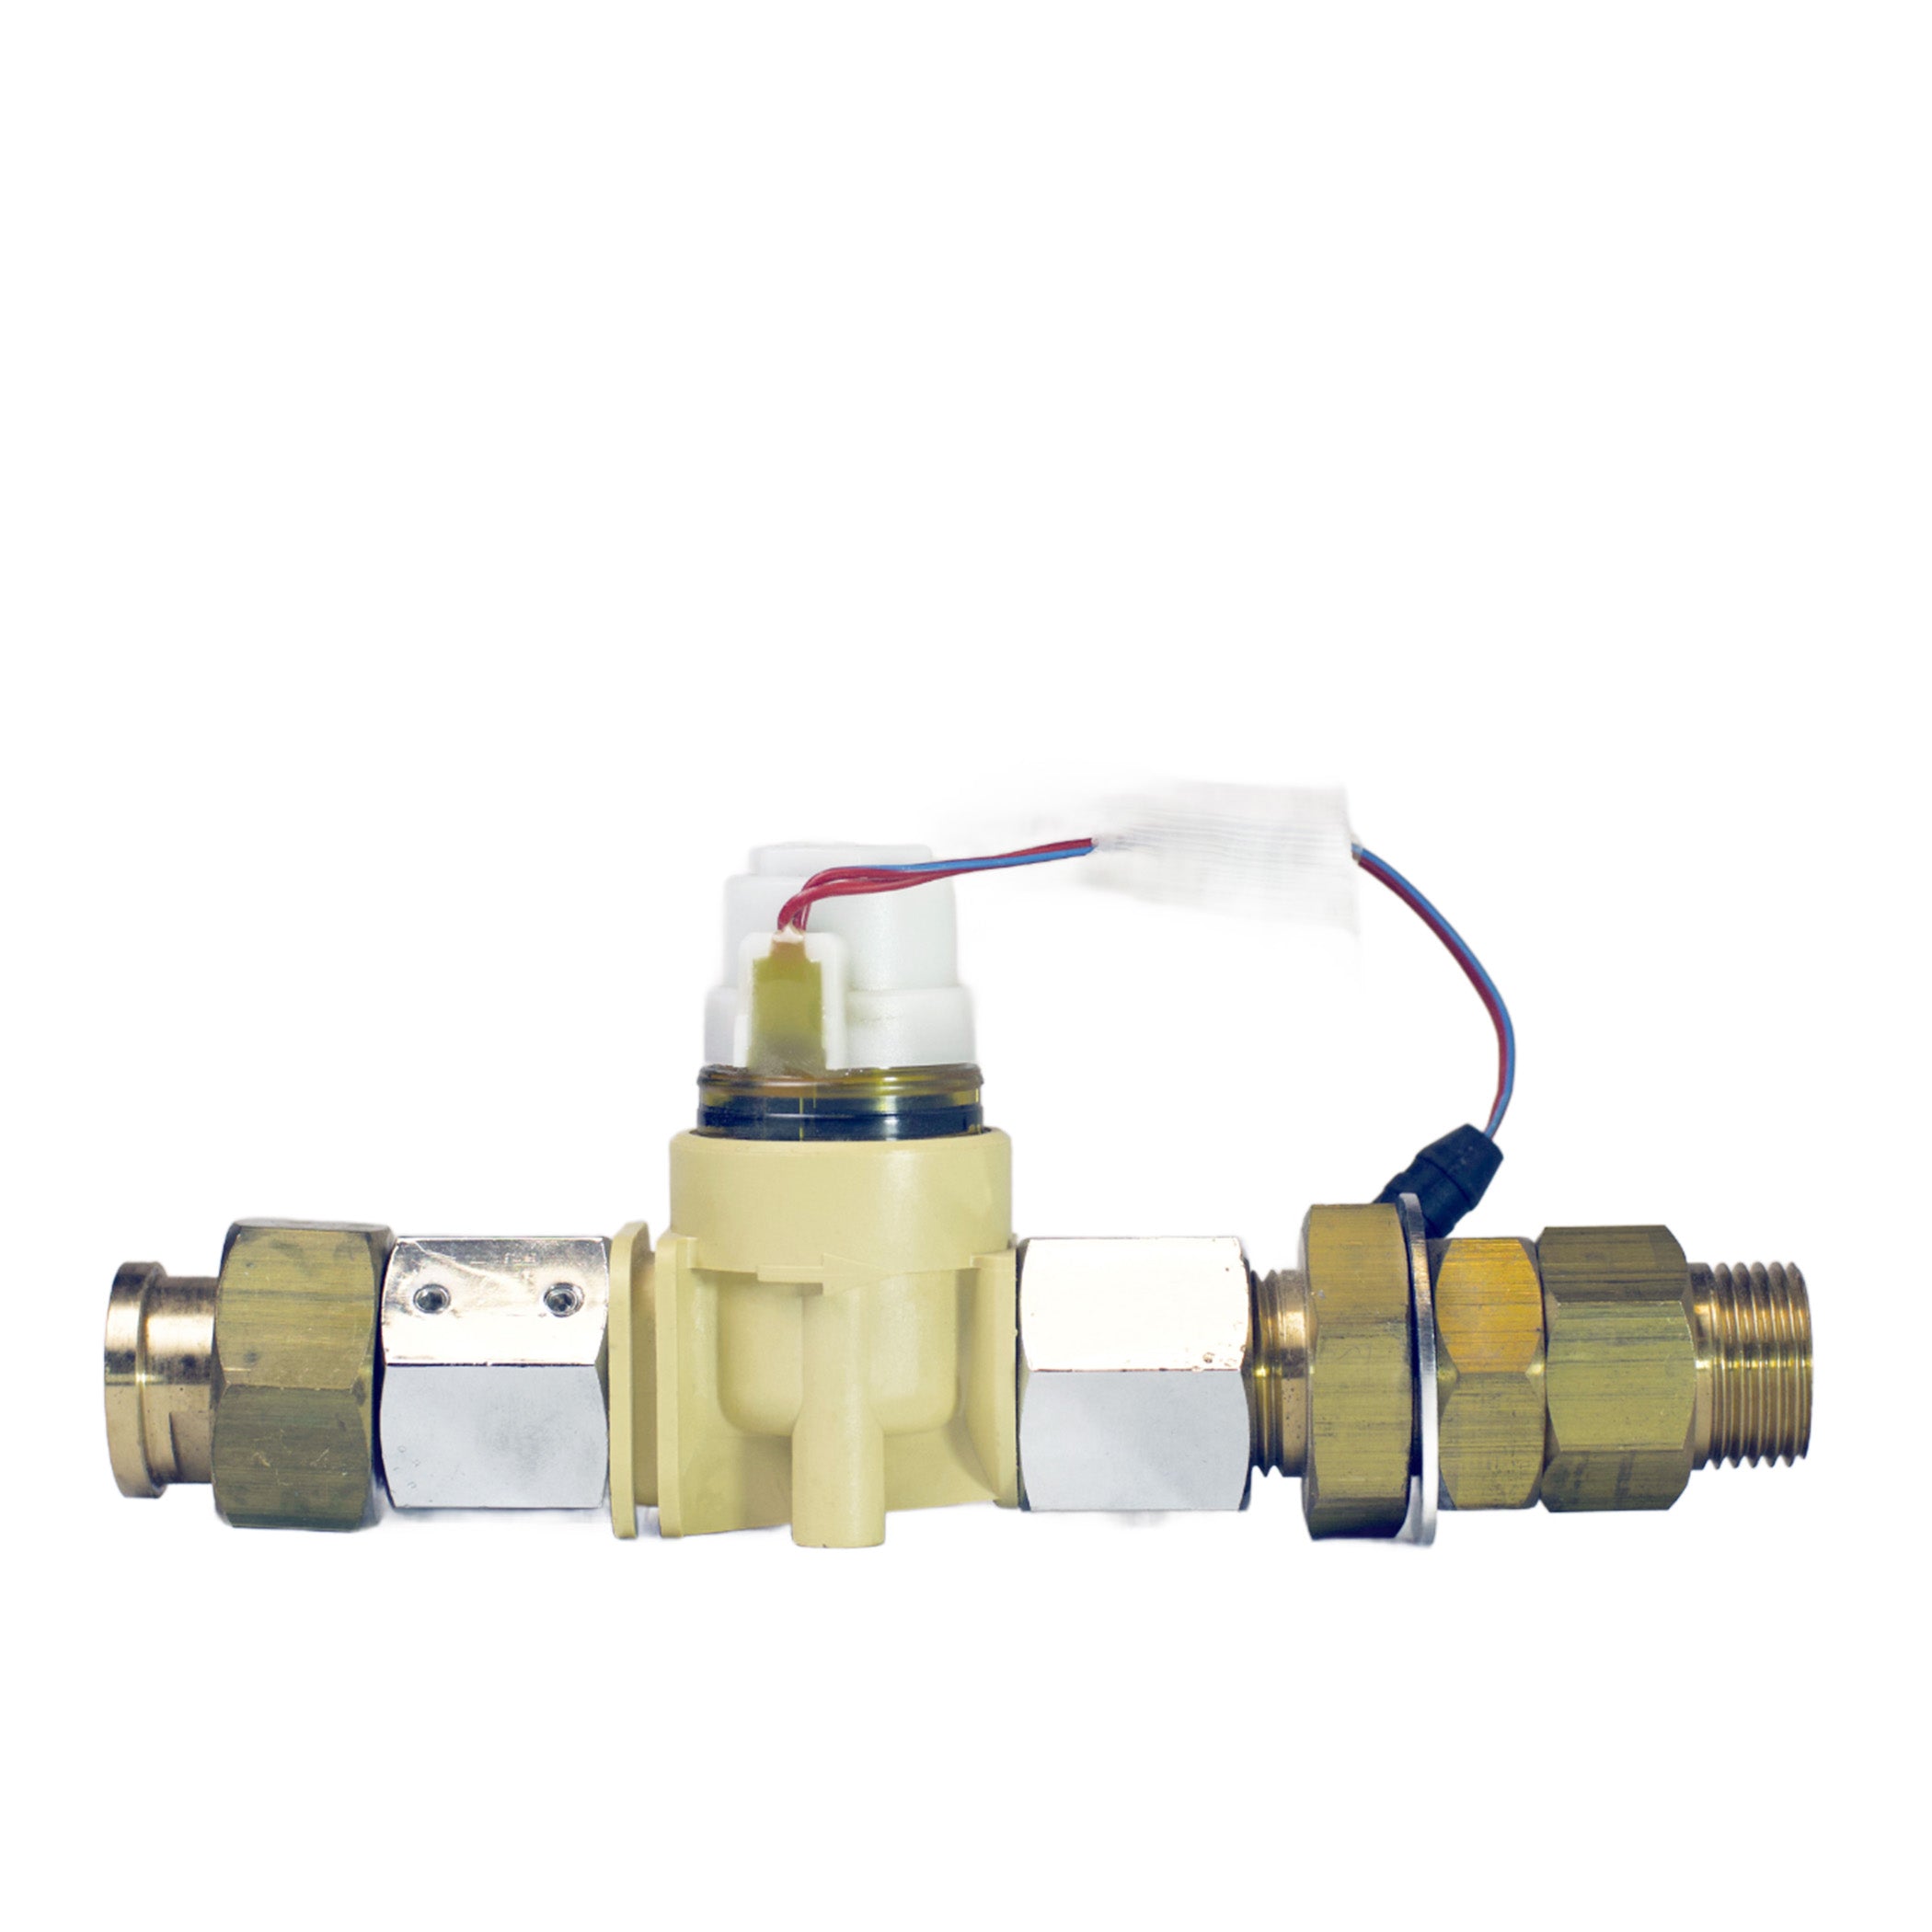 PSE1801M  - Solenoid Assembly for Intersan Sanispray Washfountain with Sprayring